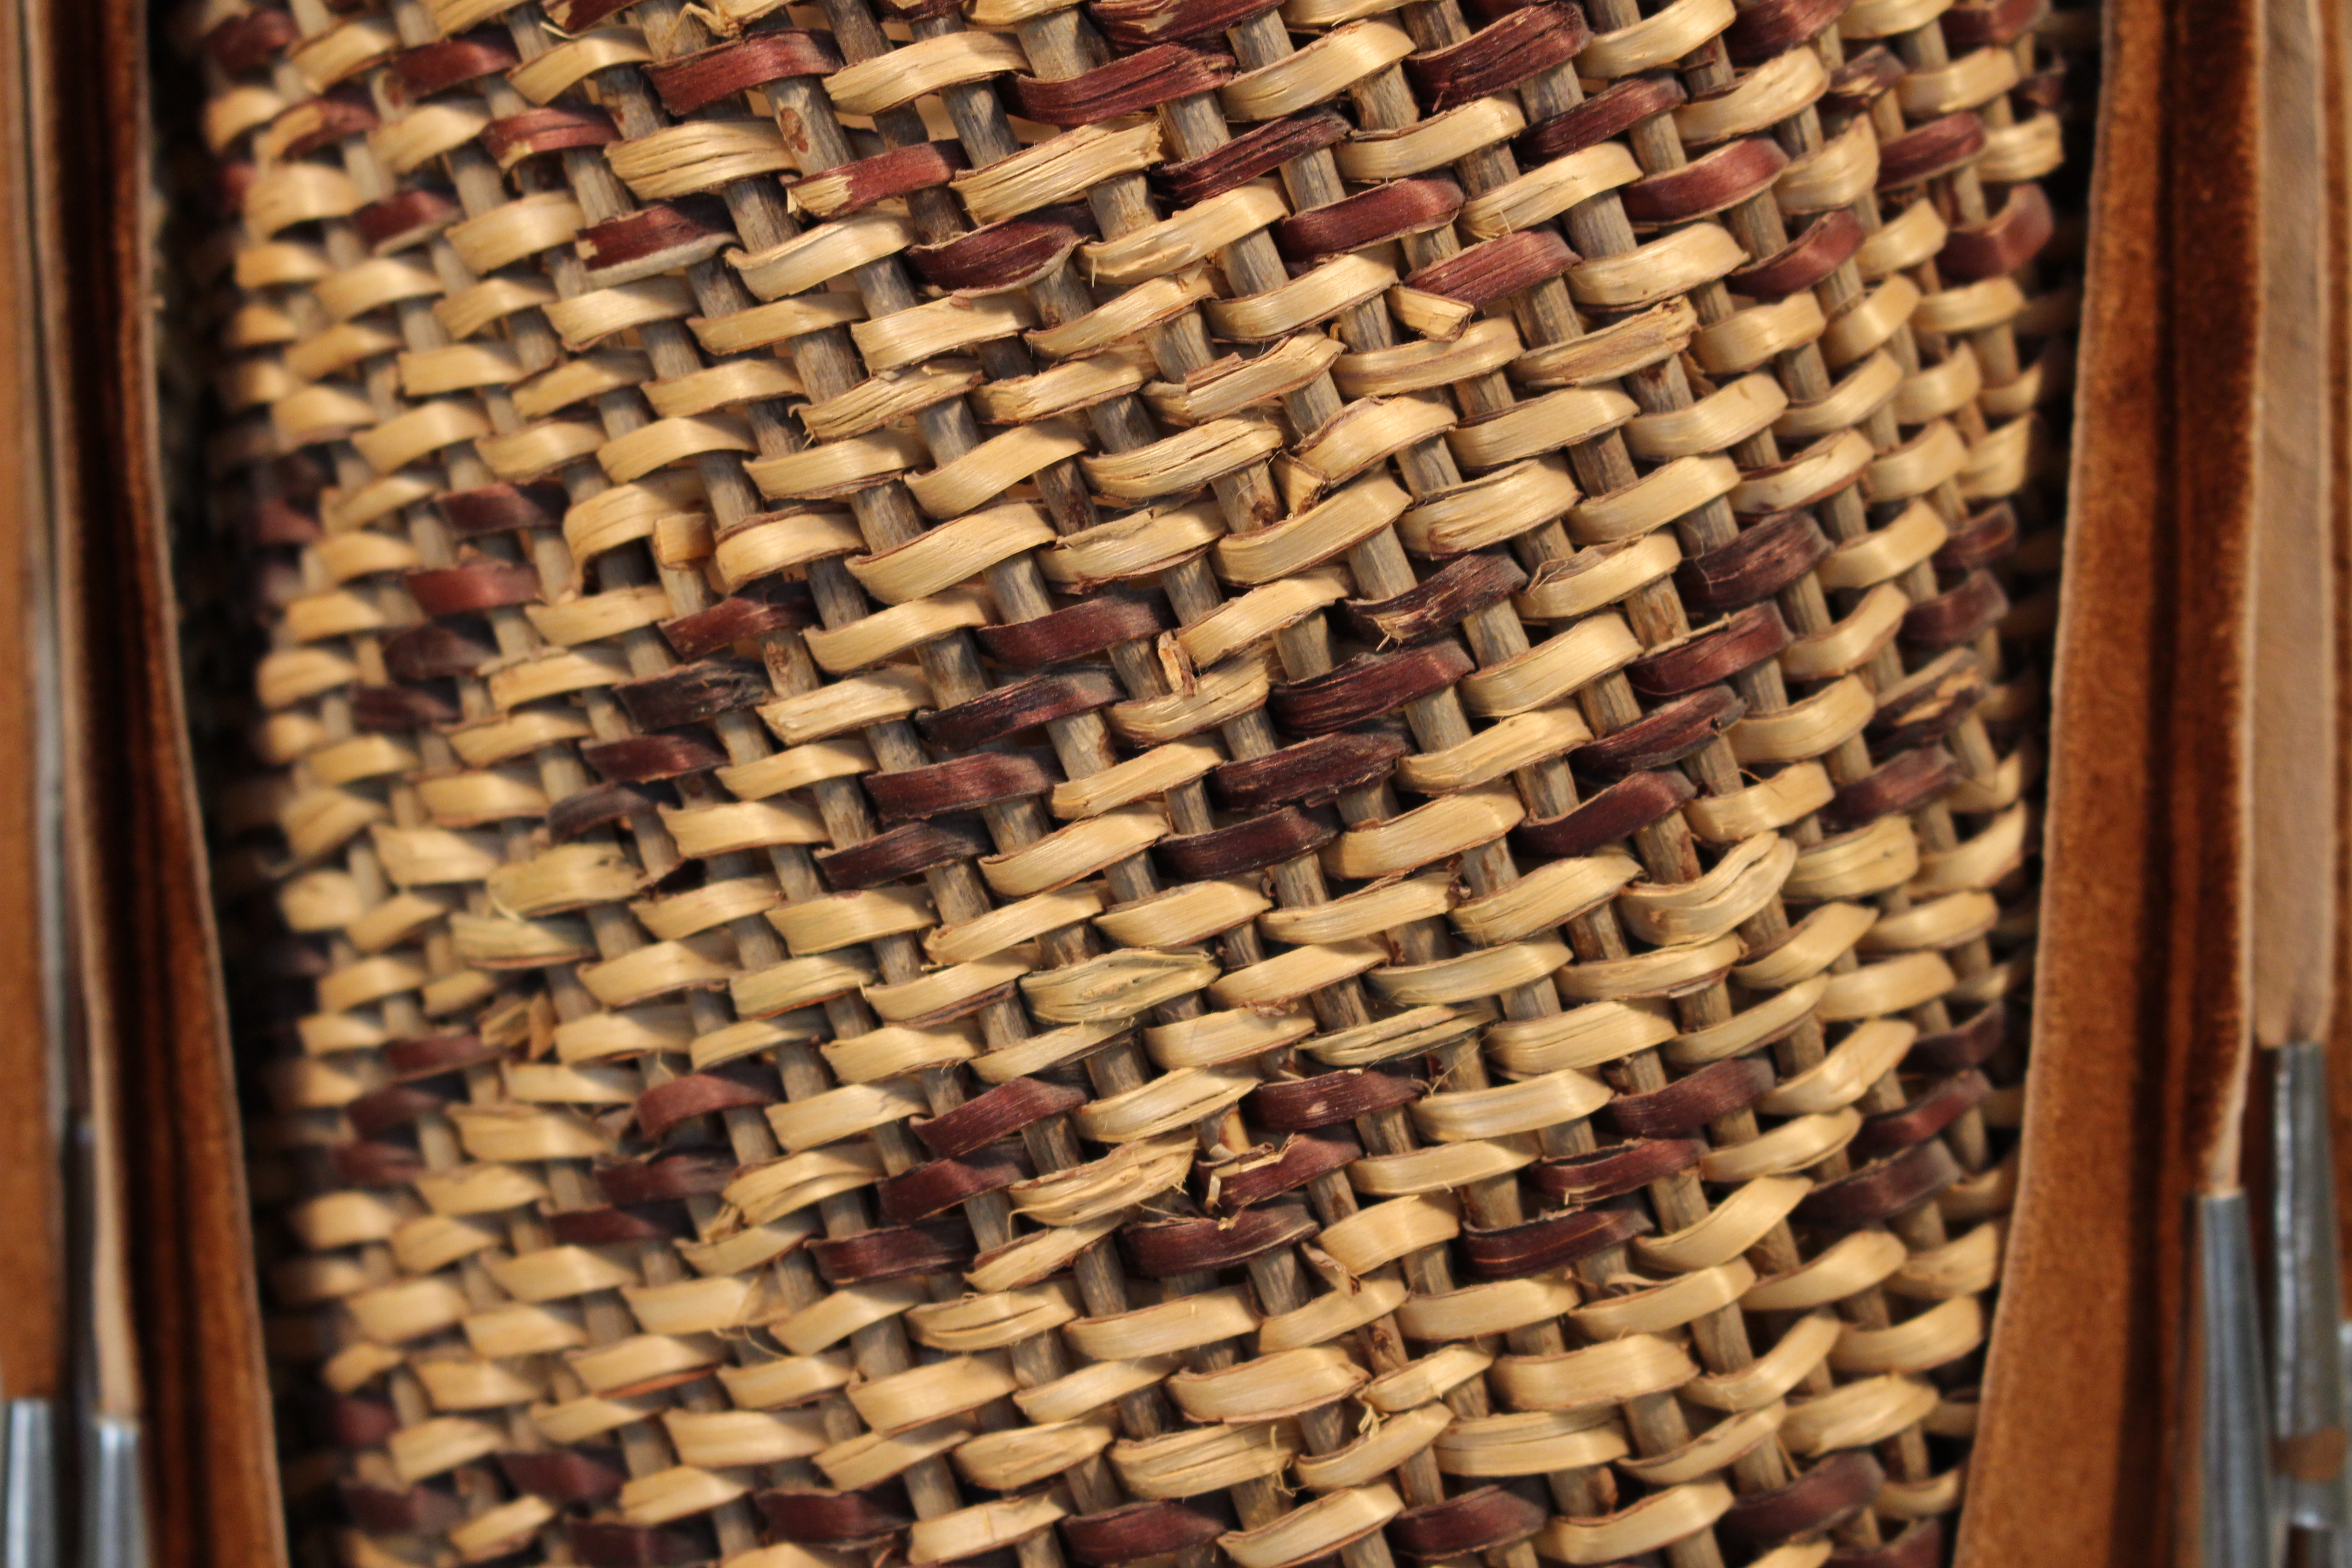 Close-up of the twined basket weave